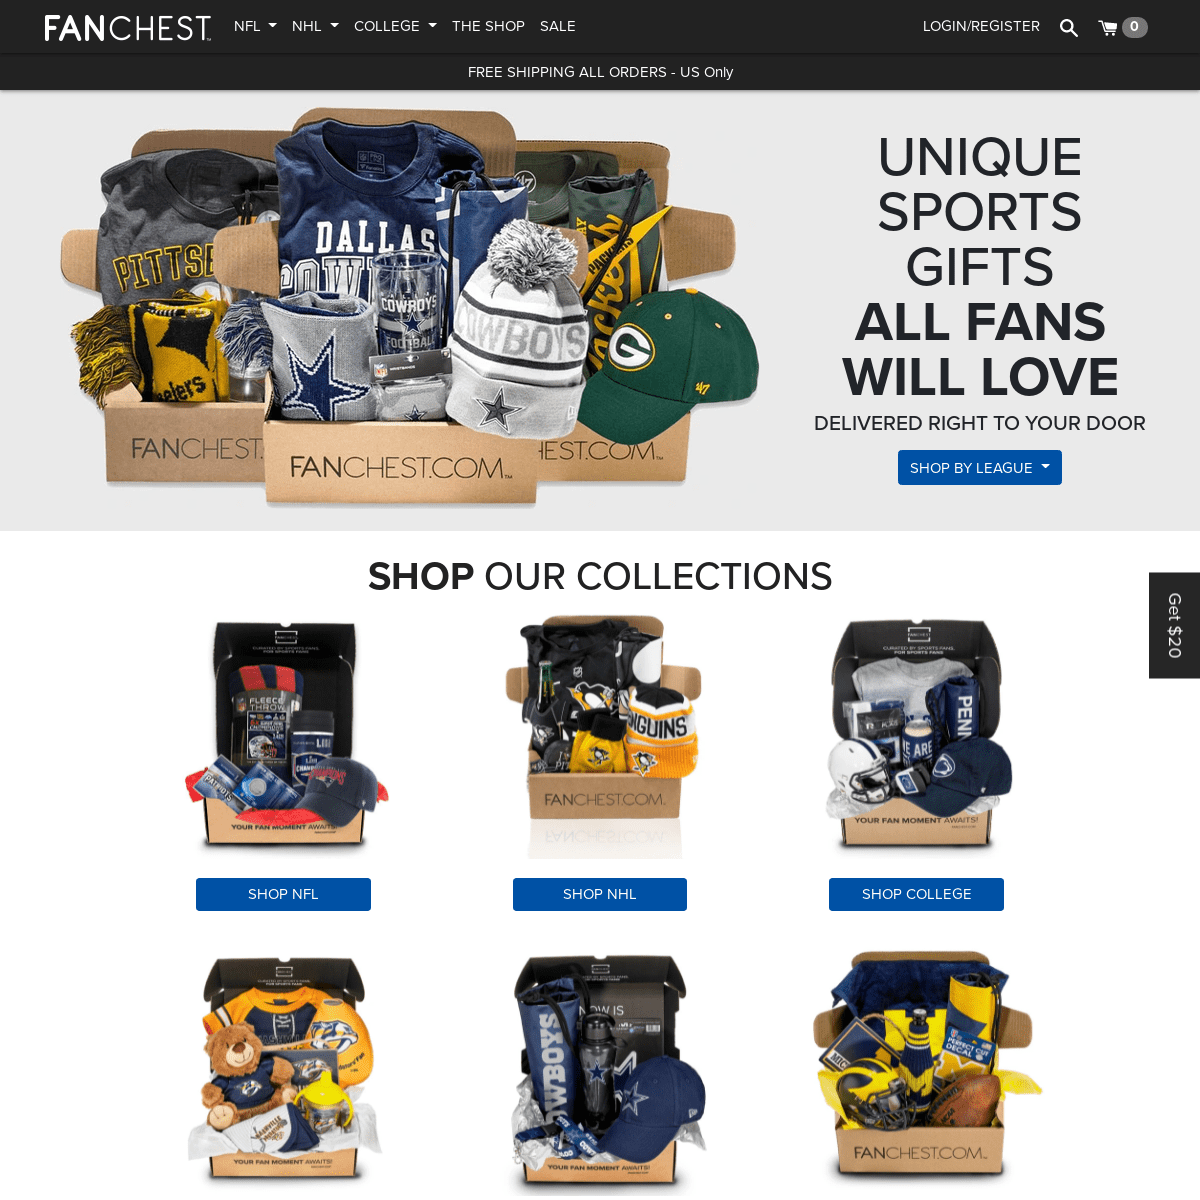 A complete backup of https://fanchest.com